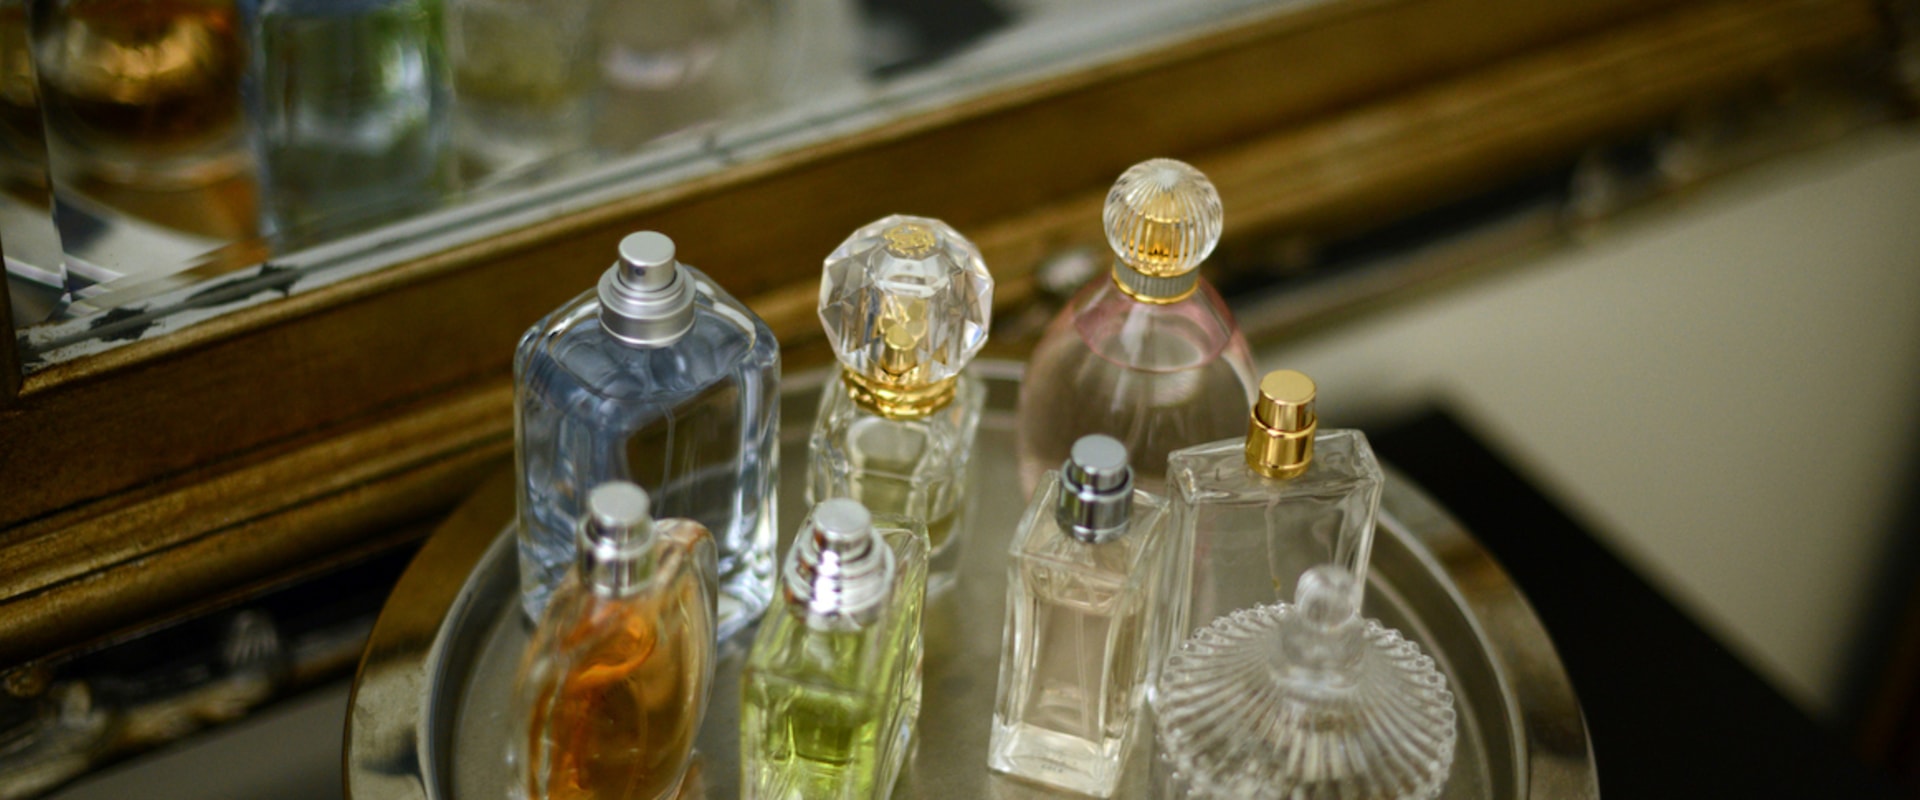 How long should an expensive bottle of perfume last?